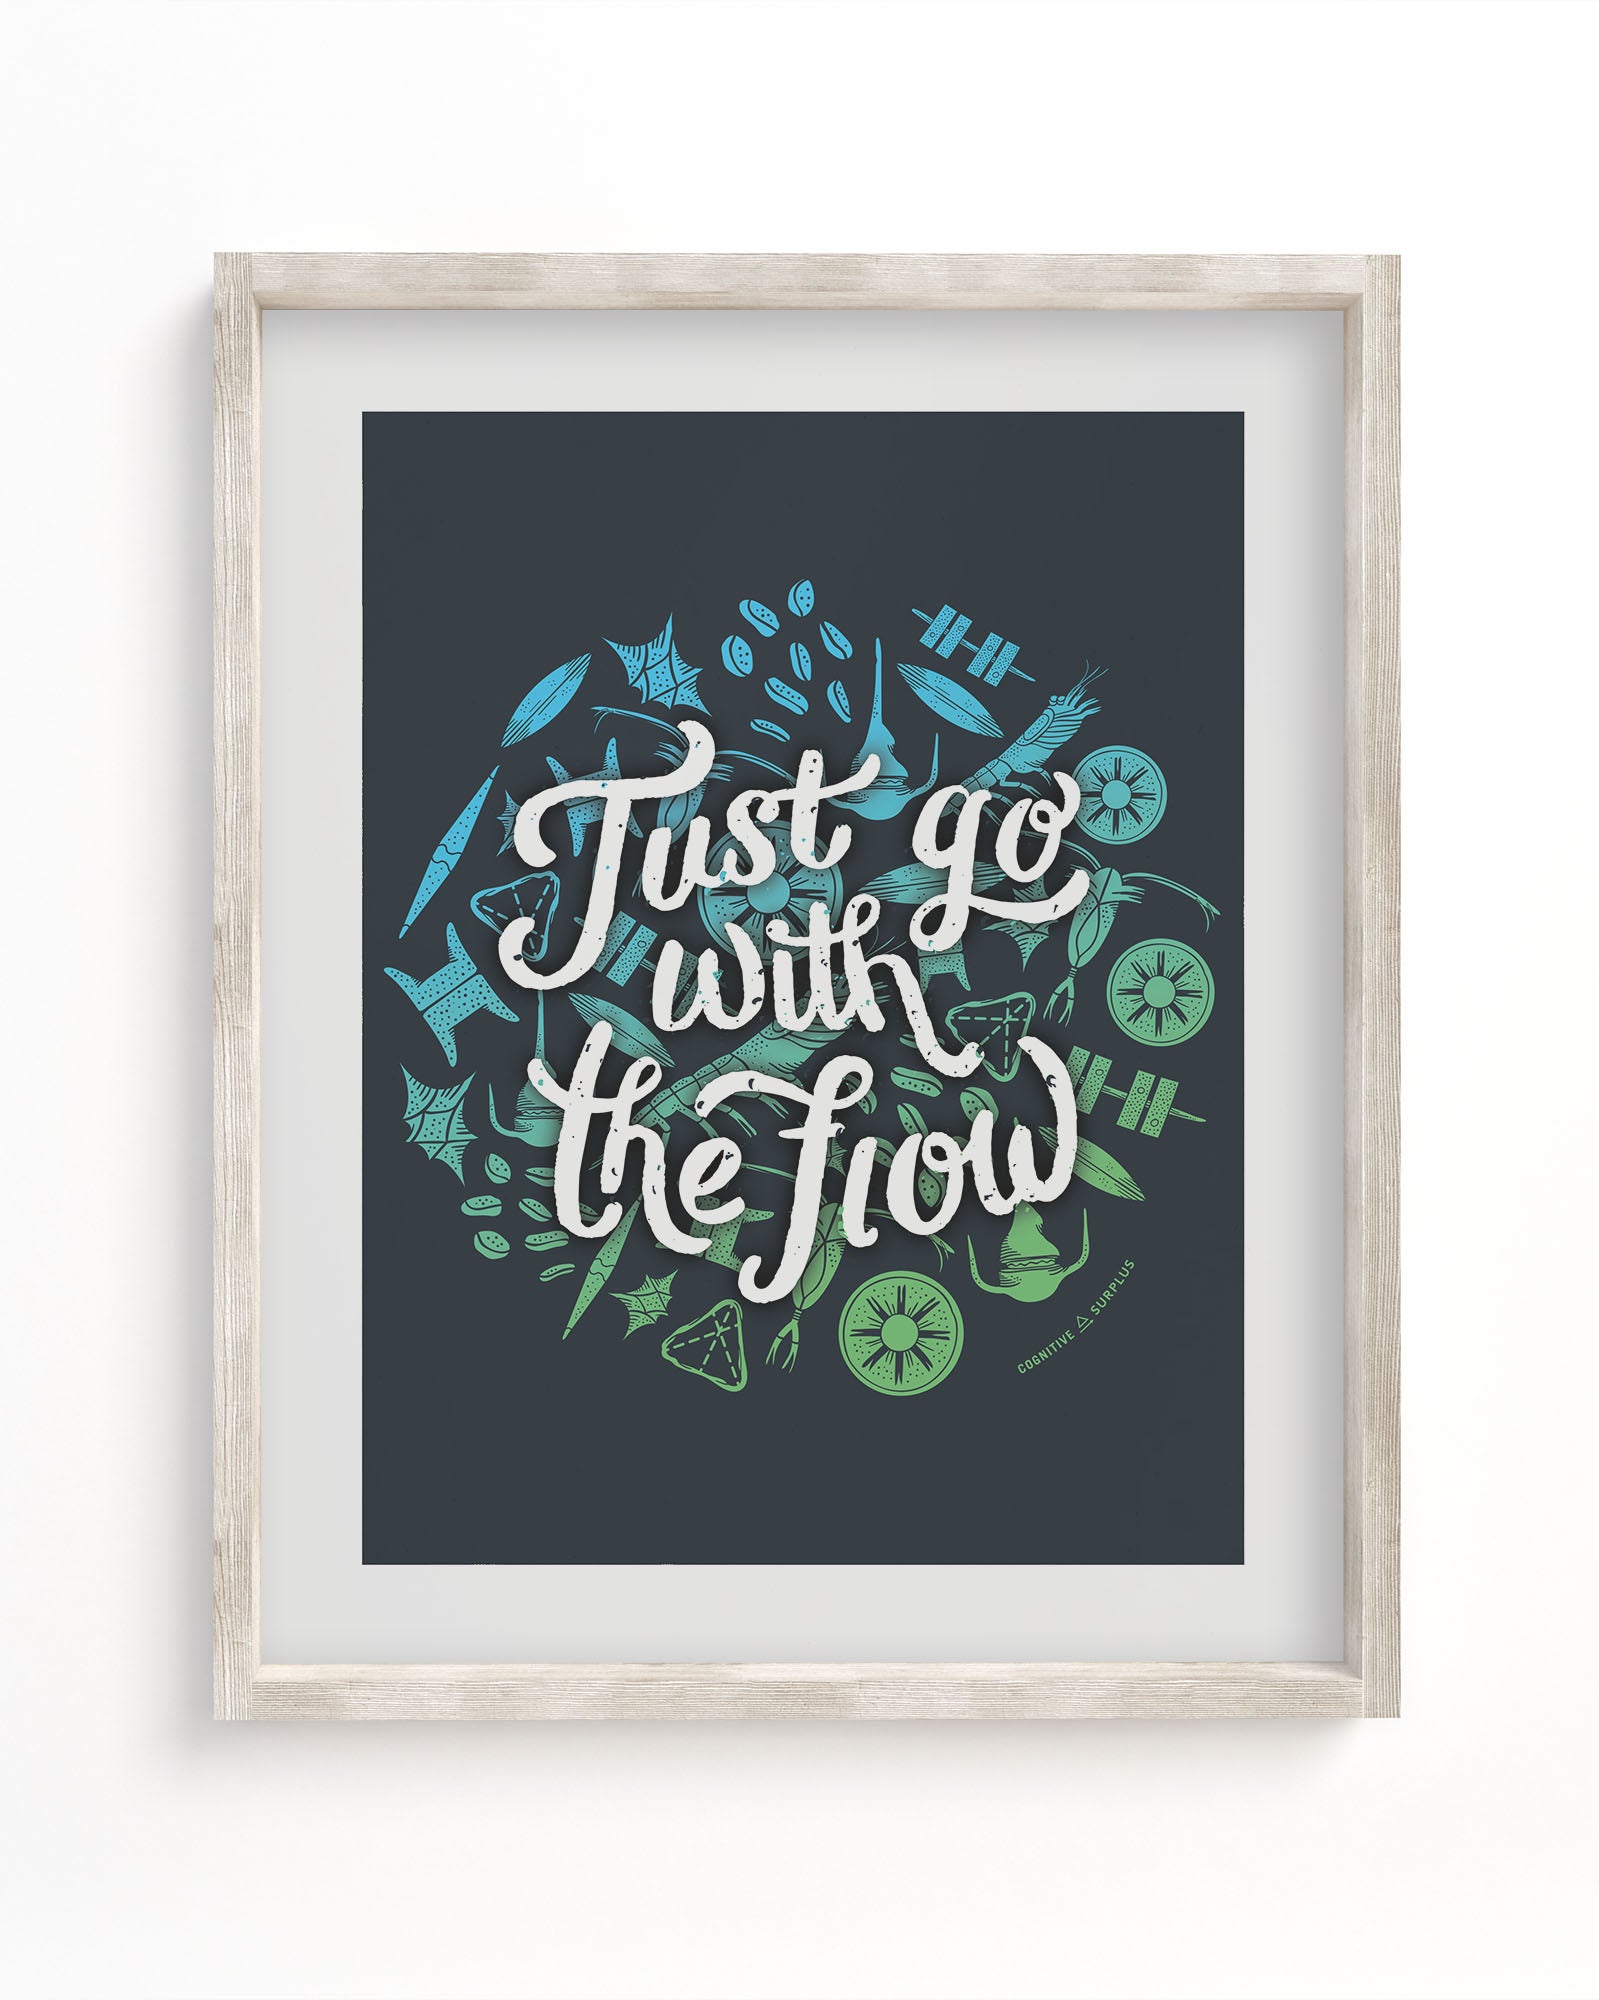 Just Plankton Go With the Flow Museum Print by Cognitive Surplus.